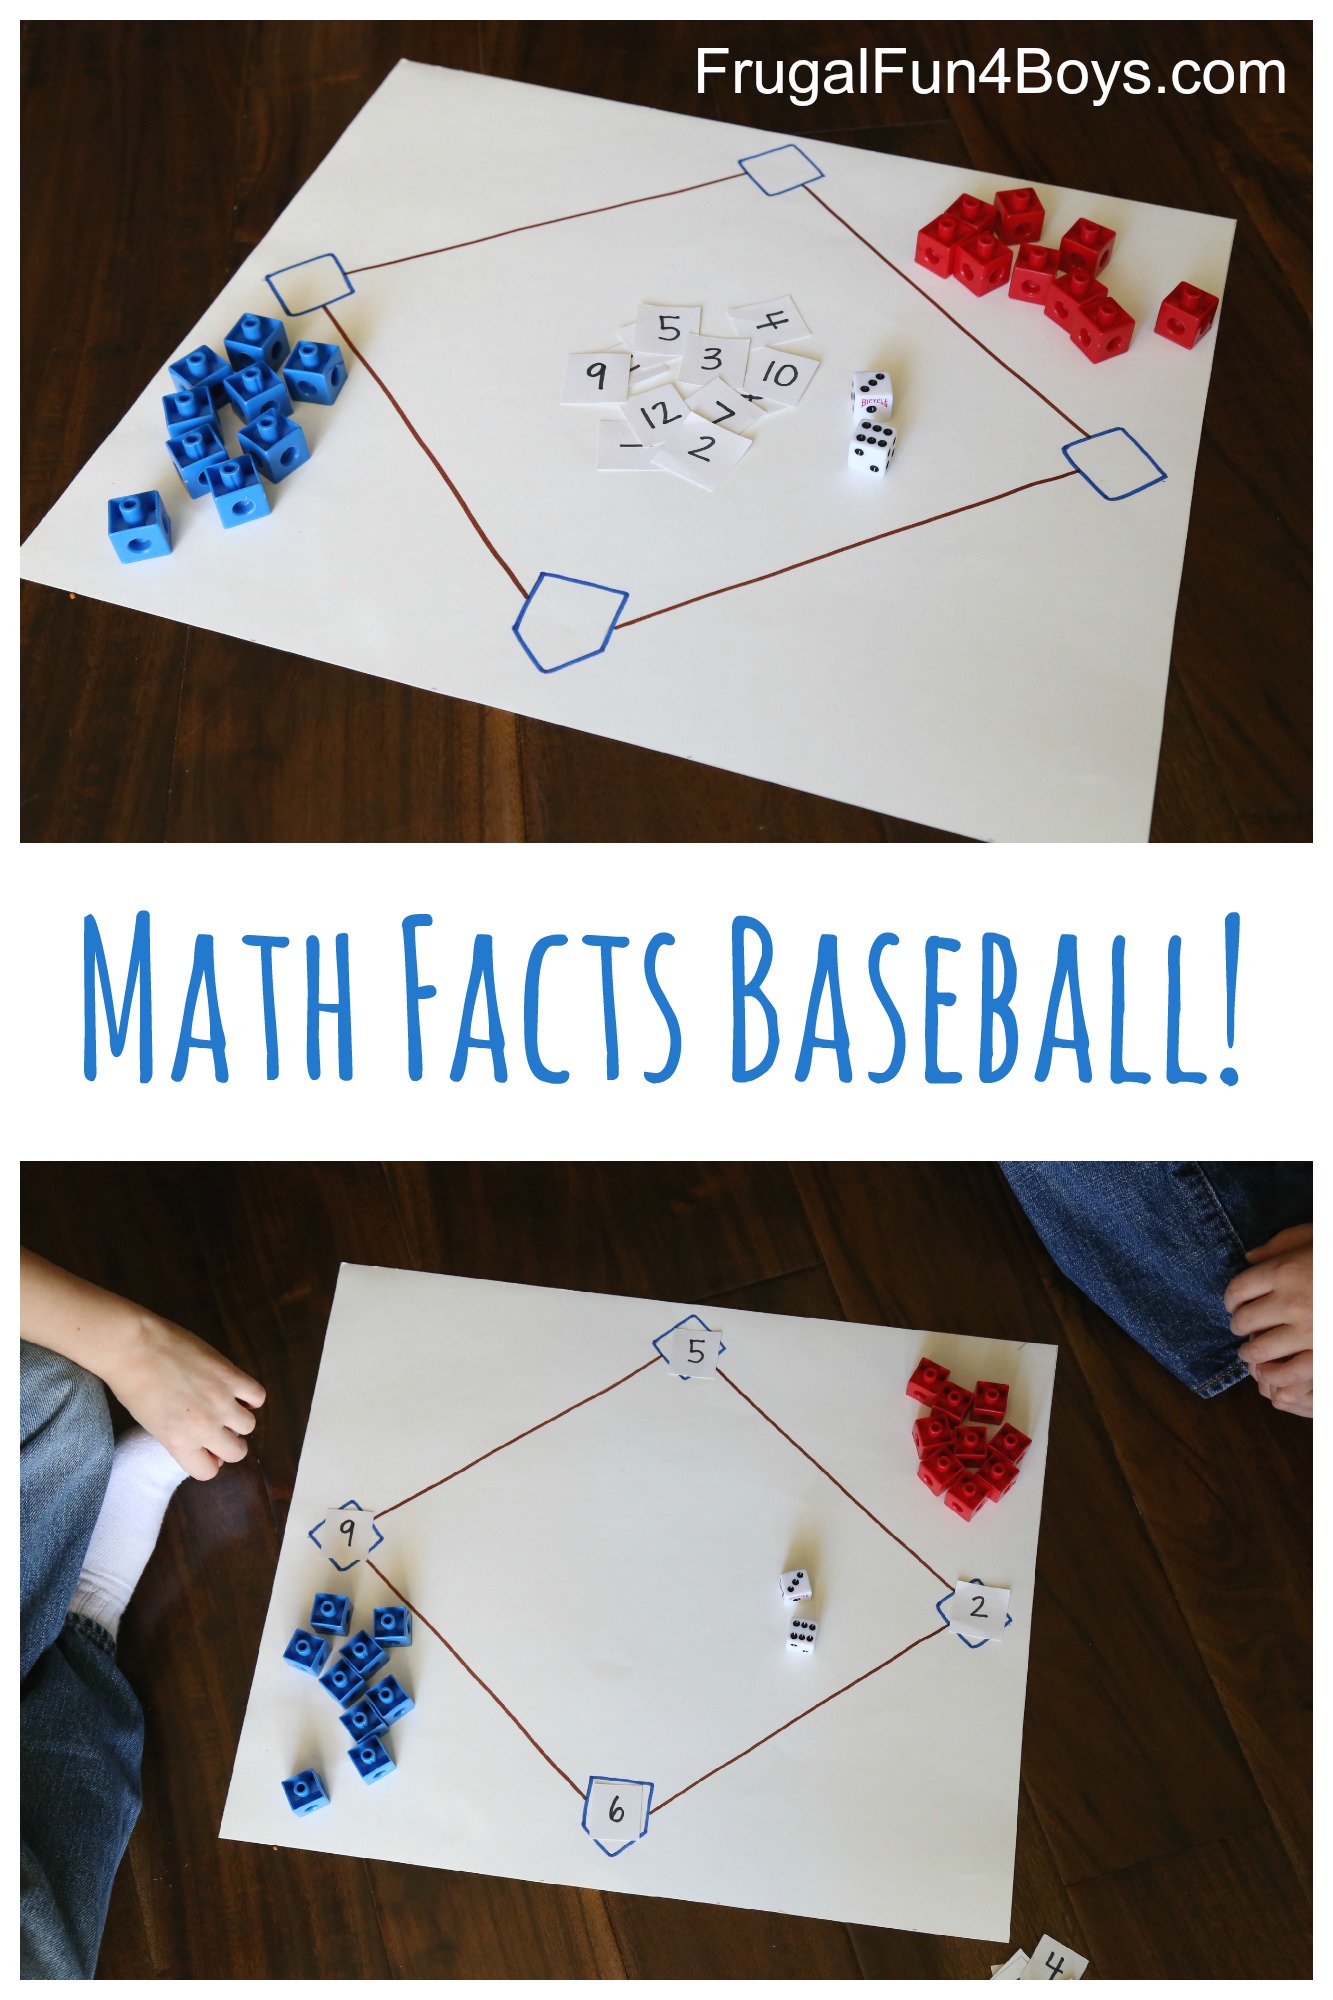 Math Facts Baseball - Use this game to practice addition, subtraction, multiplication, or division facts!